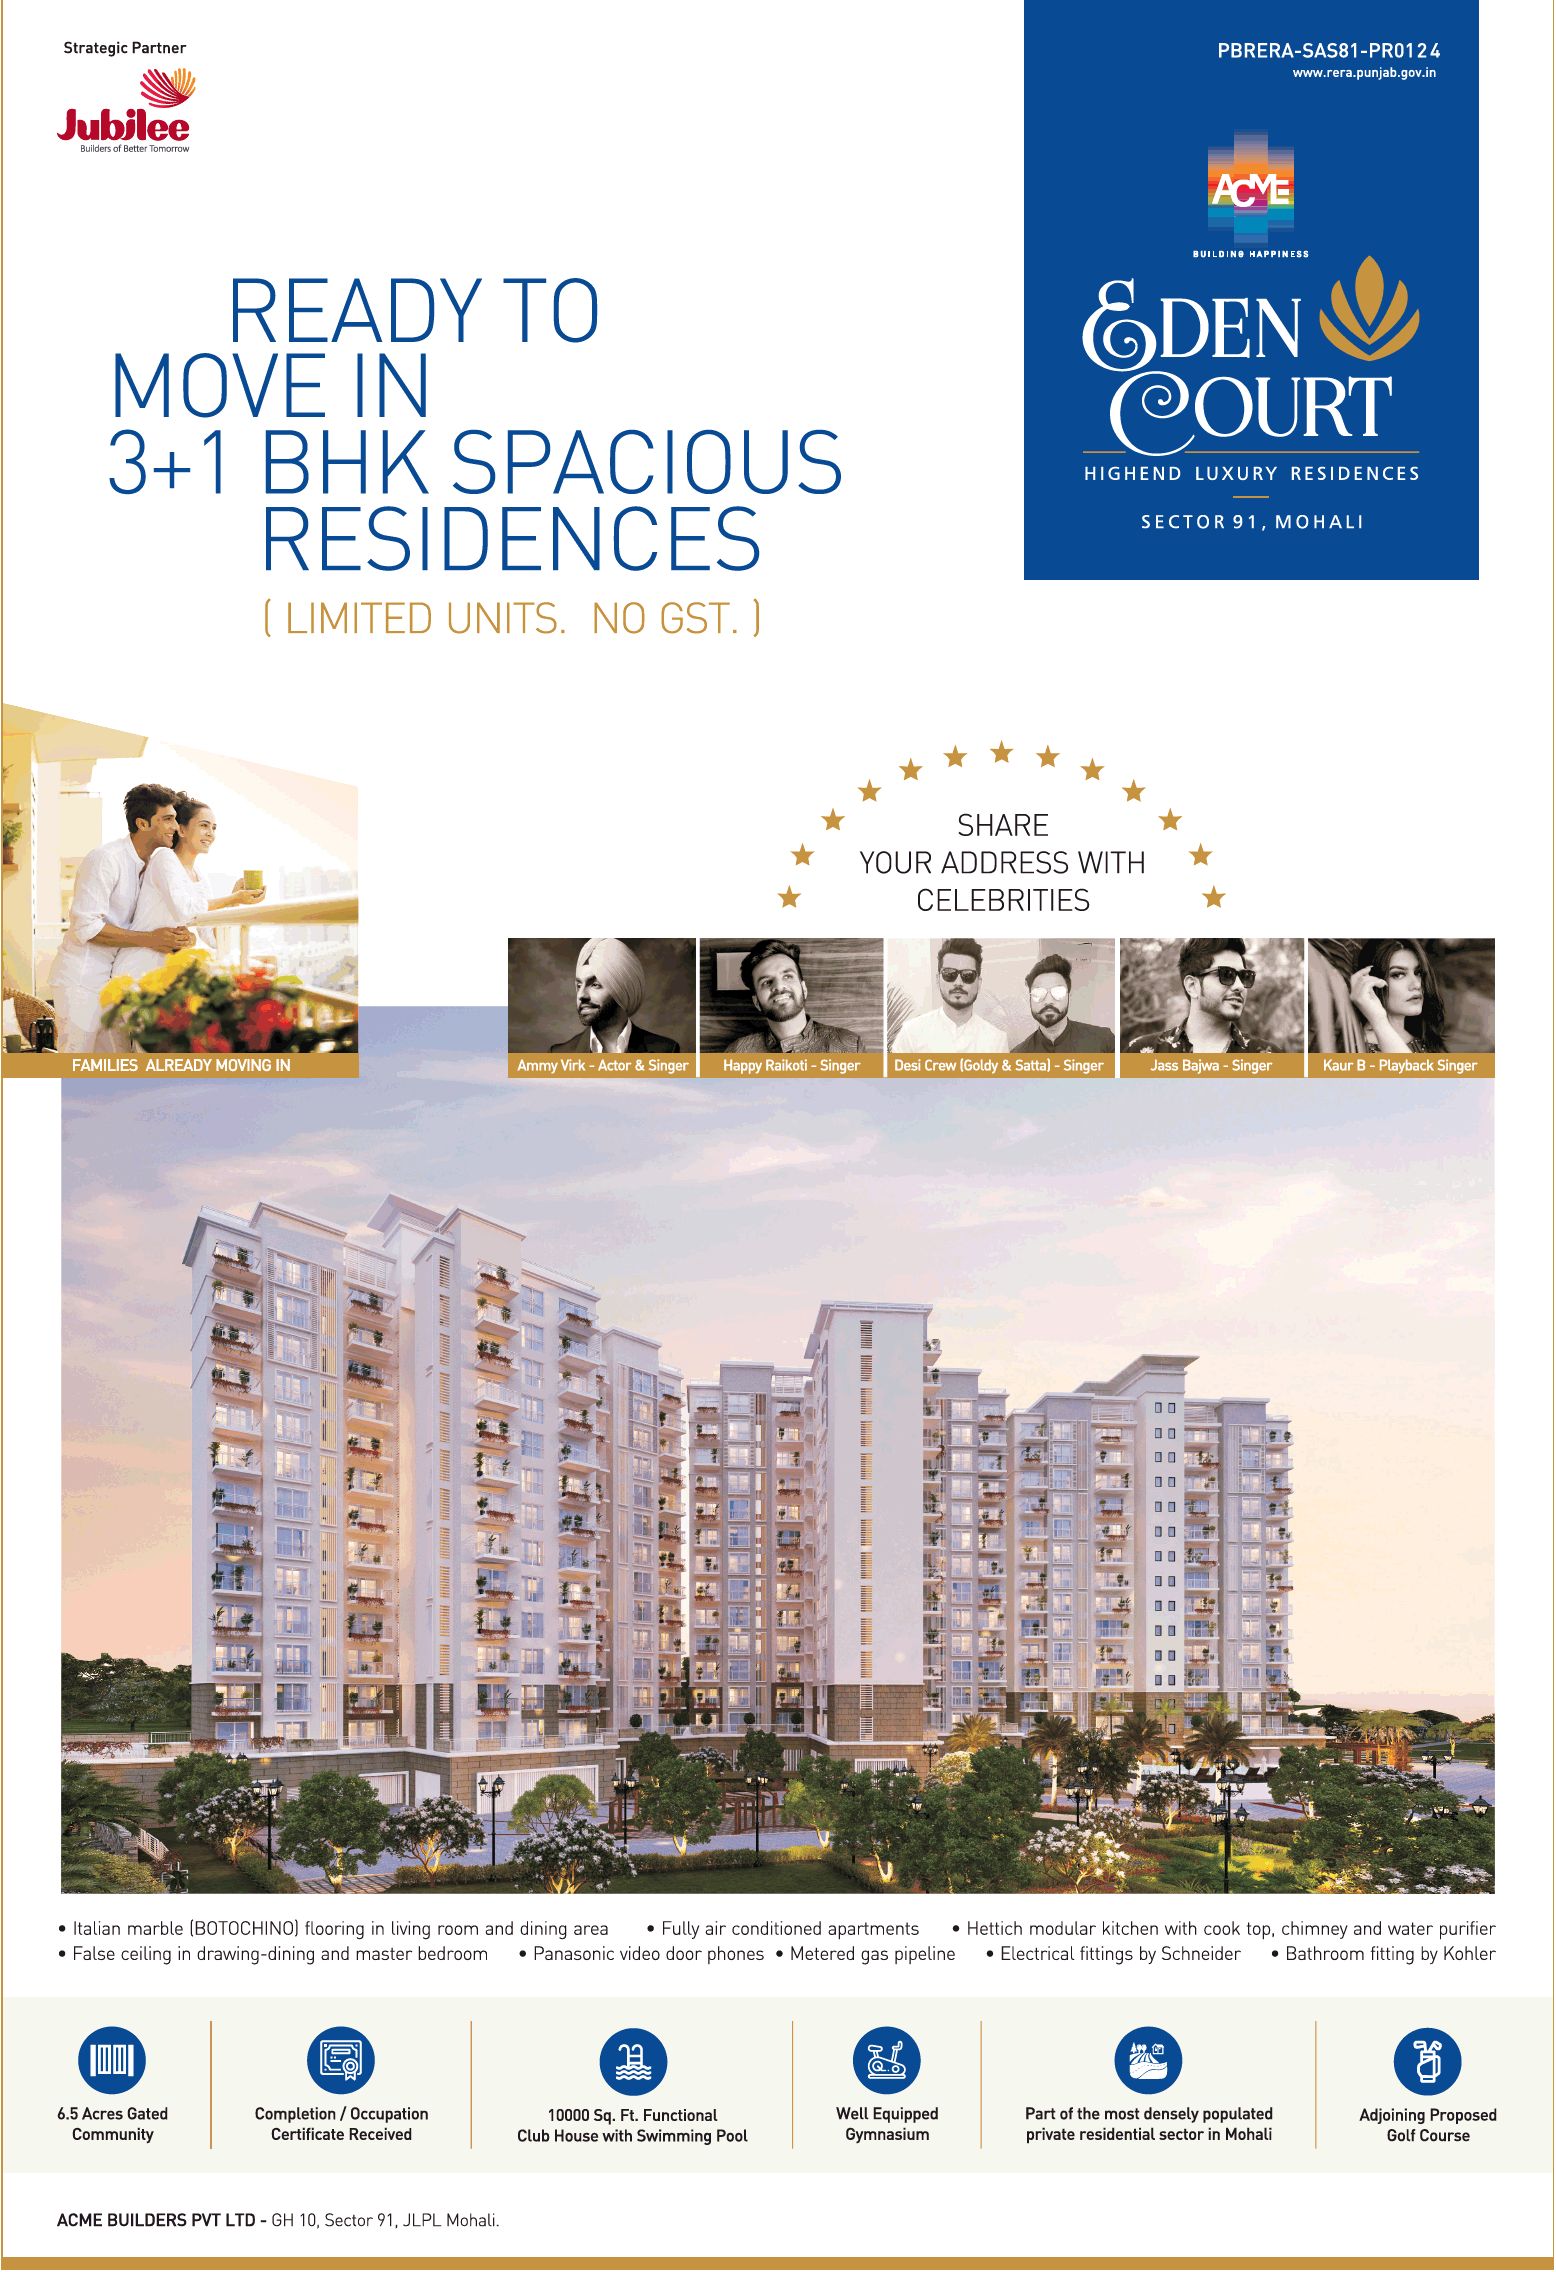 Ready to move in 3+1 bhk spacious residences at Acme Eden Court, Sector 91, Mohali